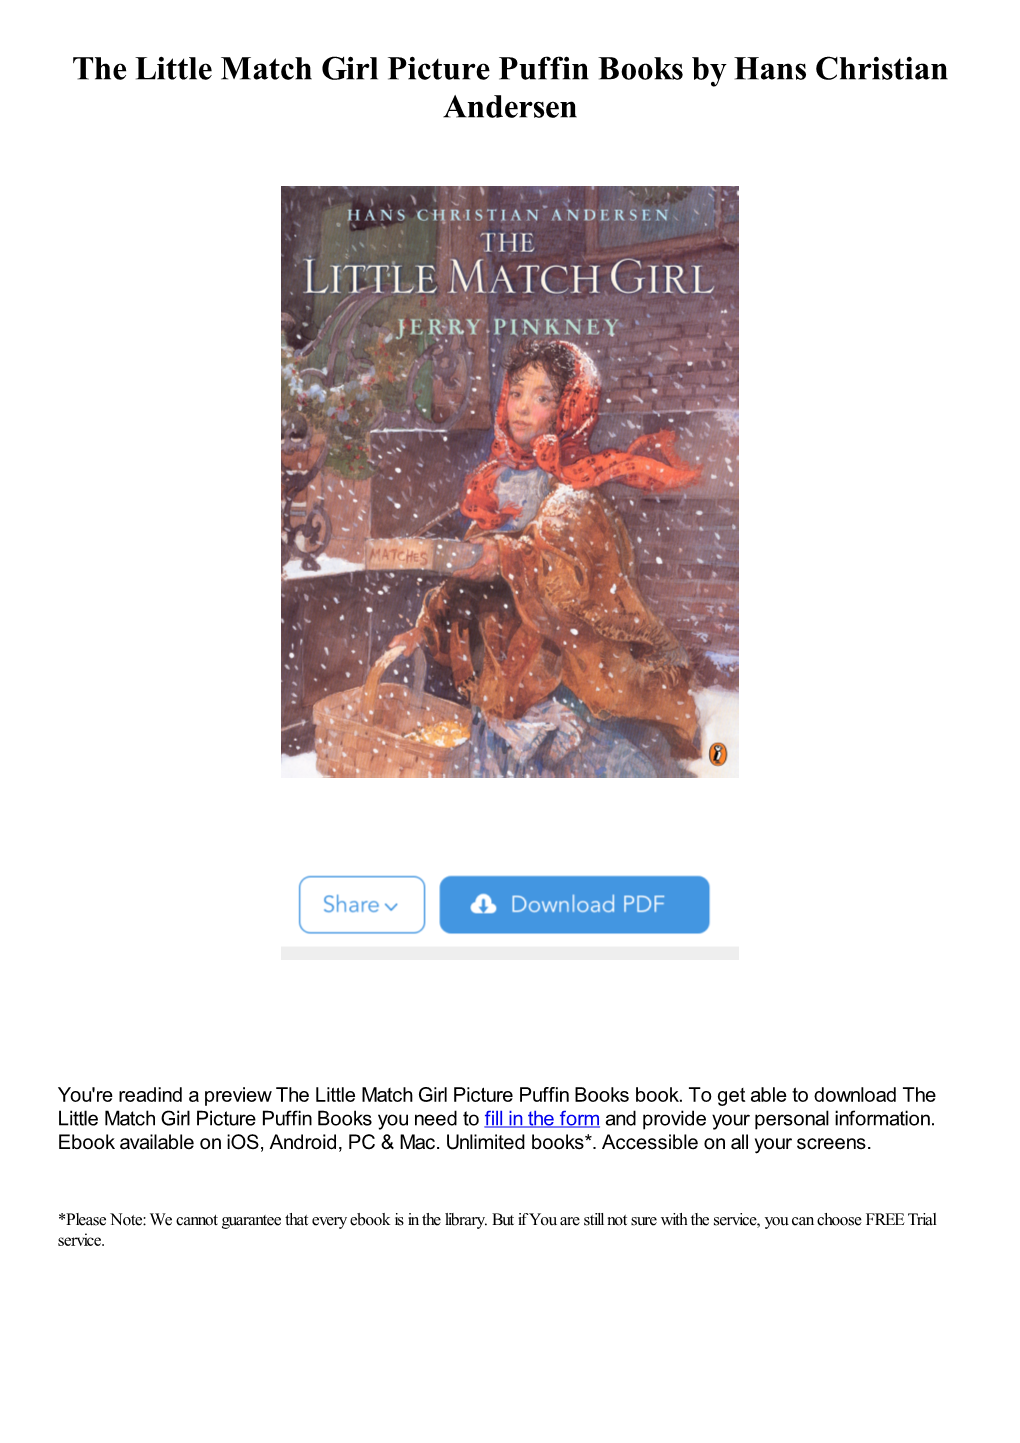 The Little Match Girl Picture Puffin Books by Hans Christian Andersen